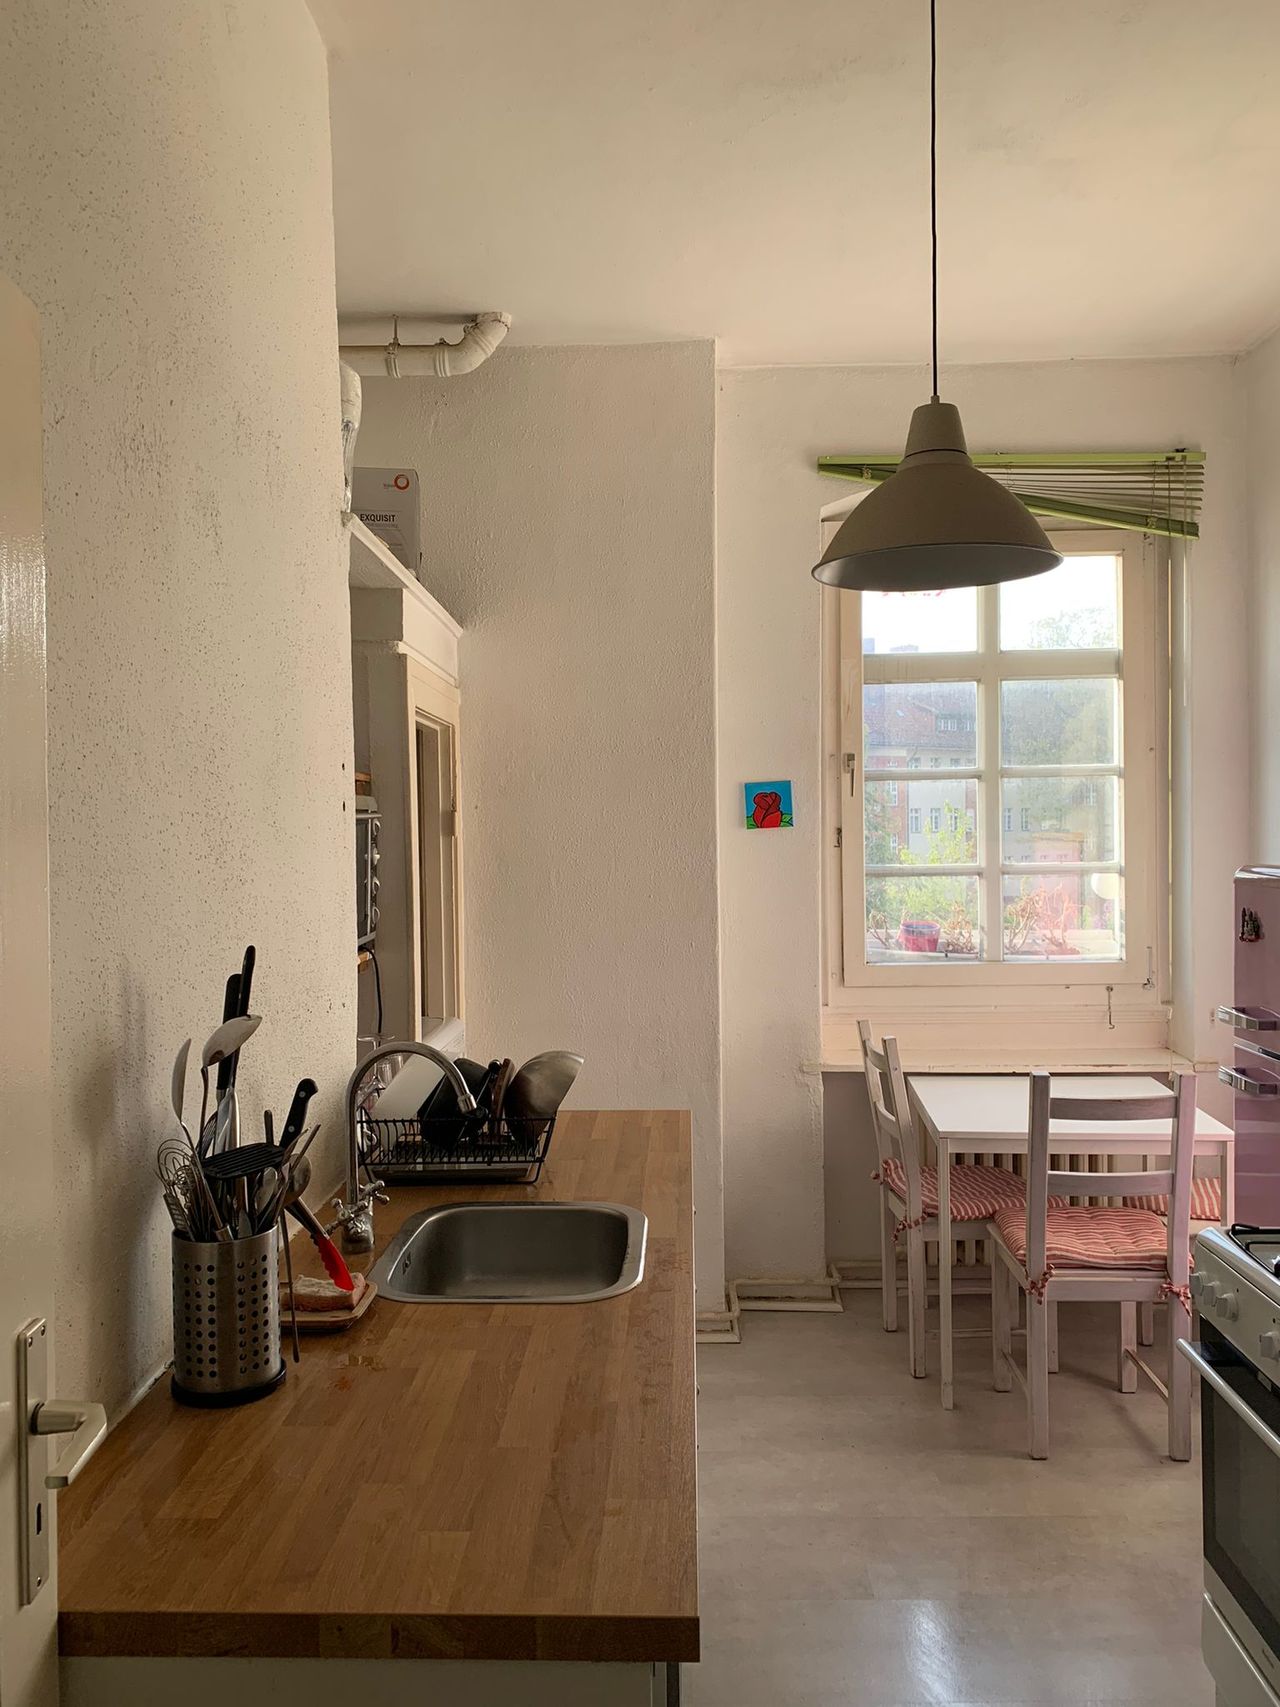 Gorgeous 2,5 rooms flat in lovely area, 2 minutes from SBahn Friedenau